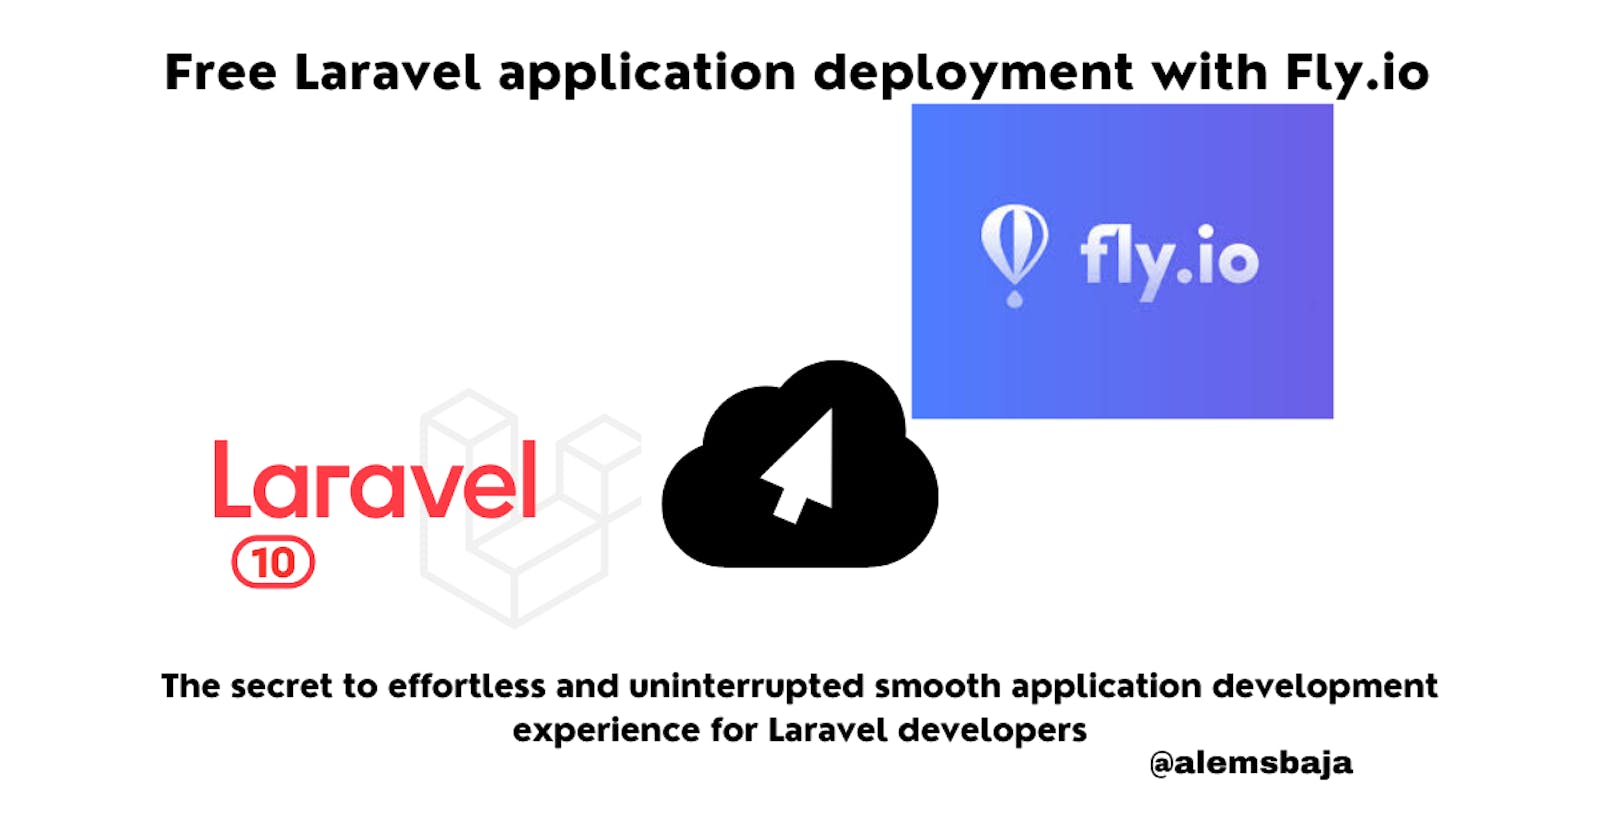 Free Laravel application deployment with Fly.io